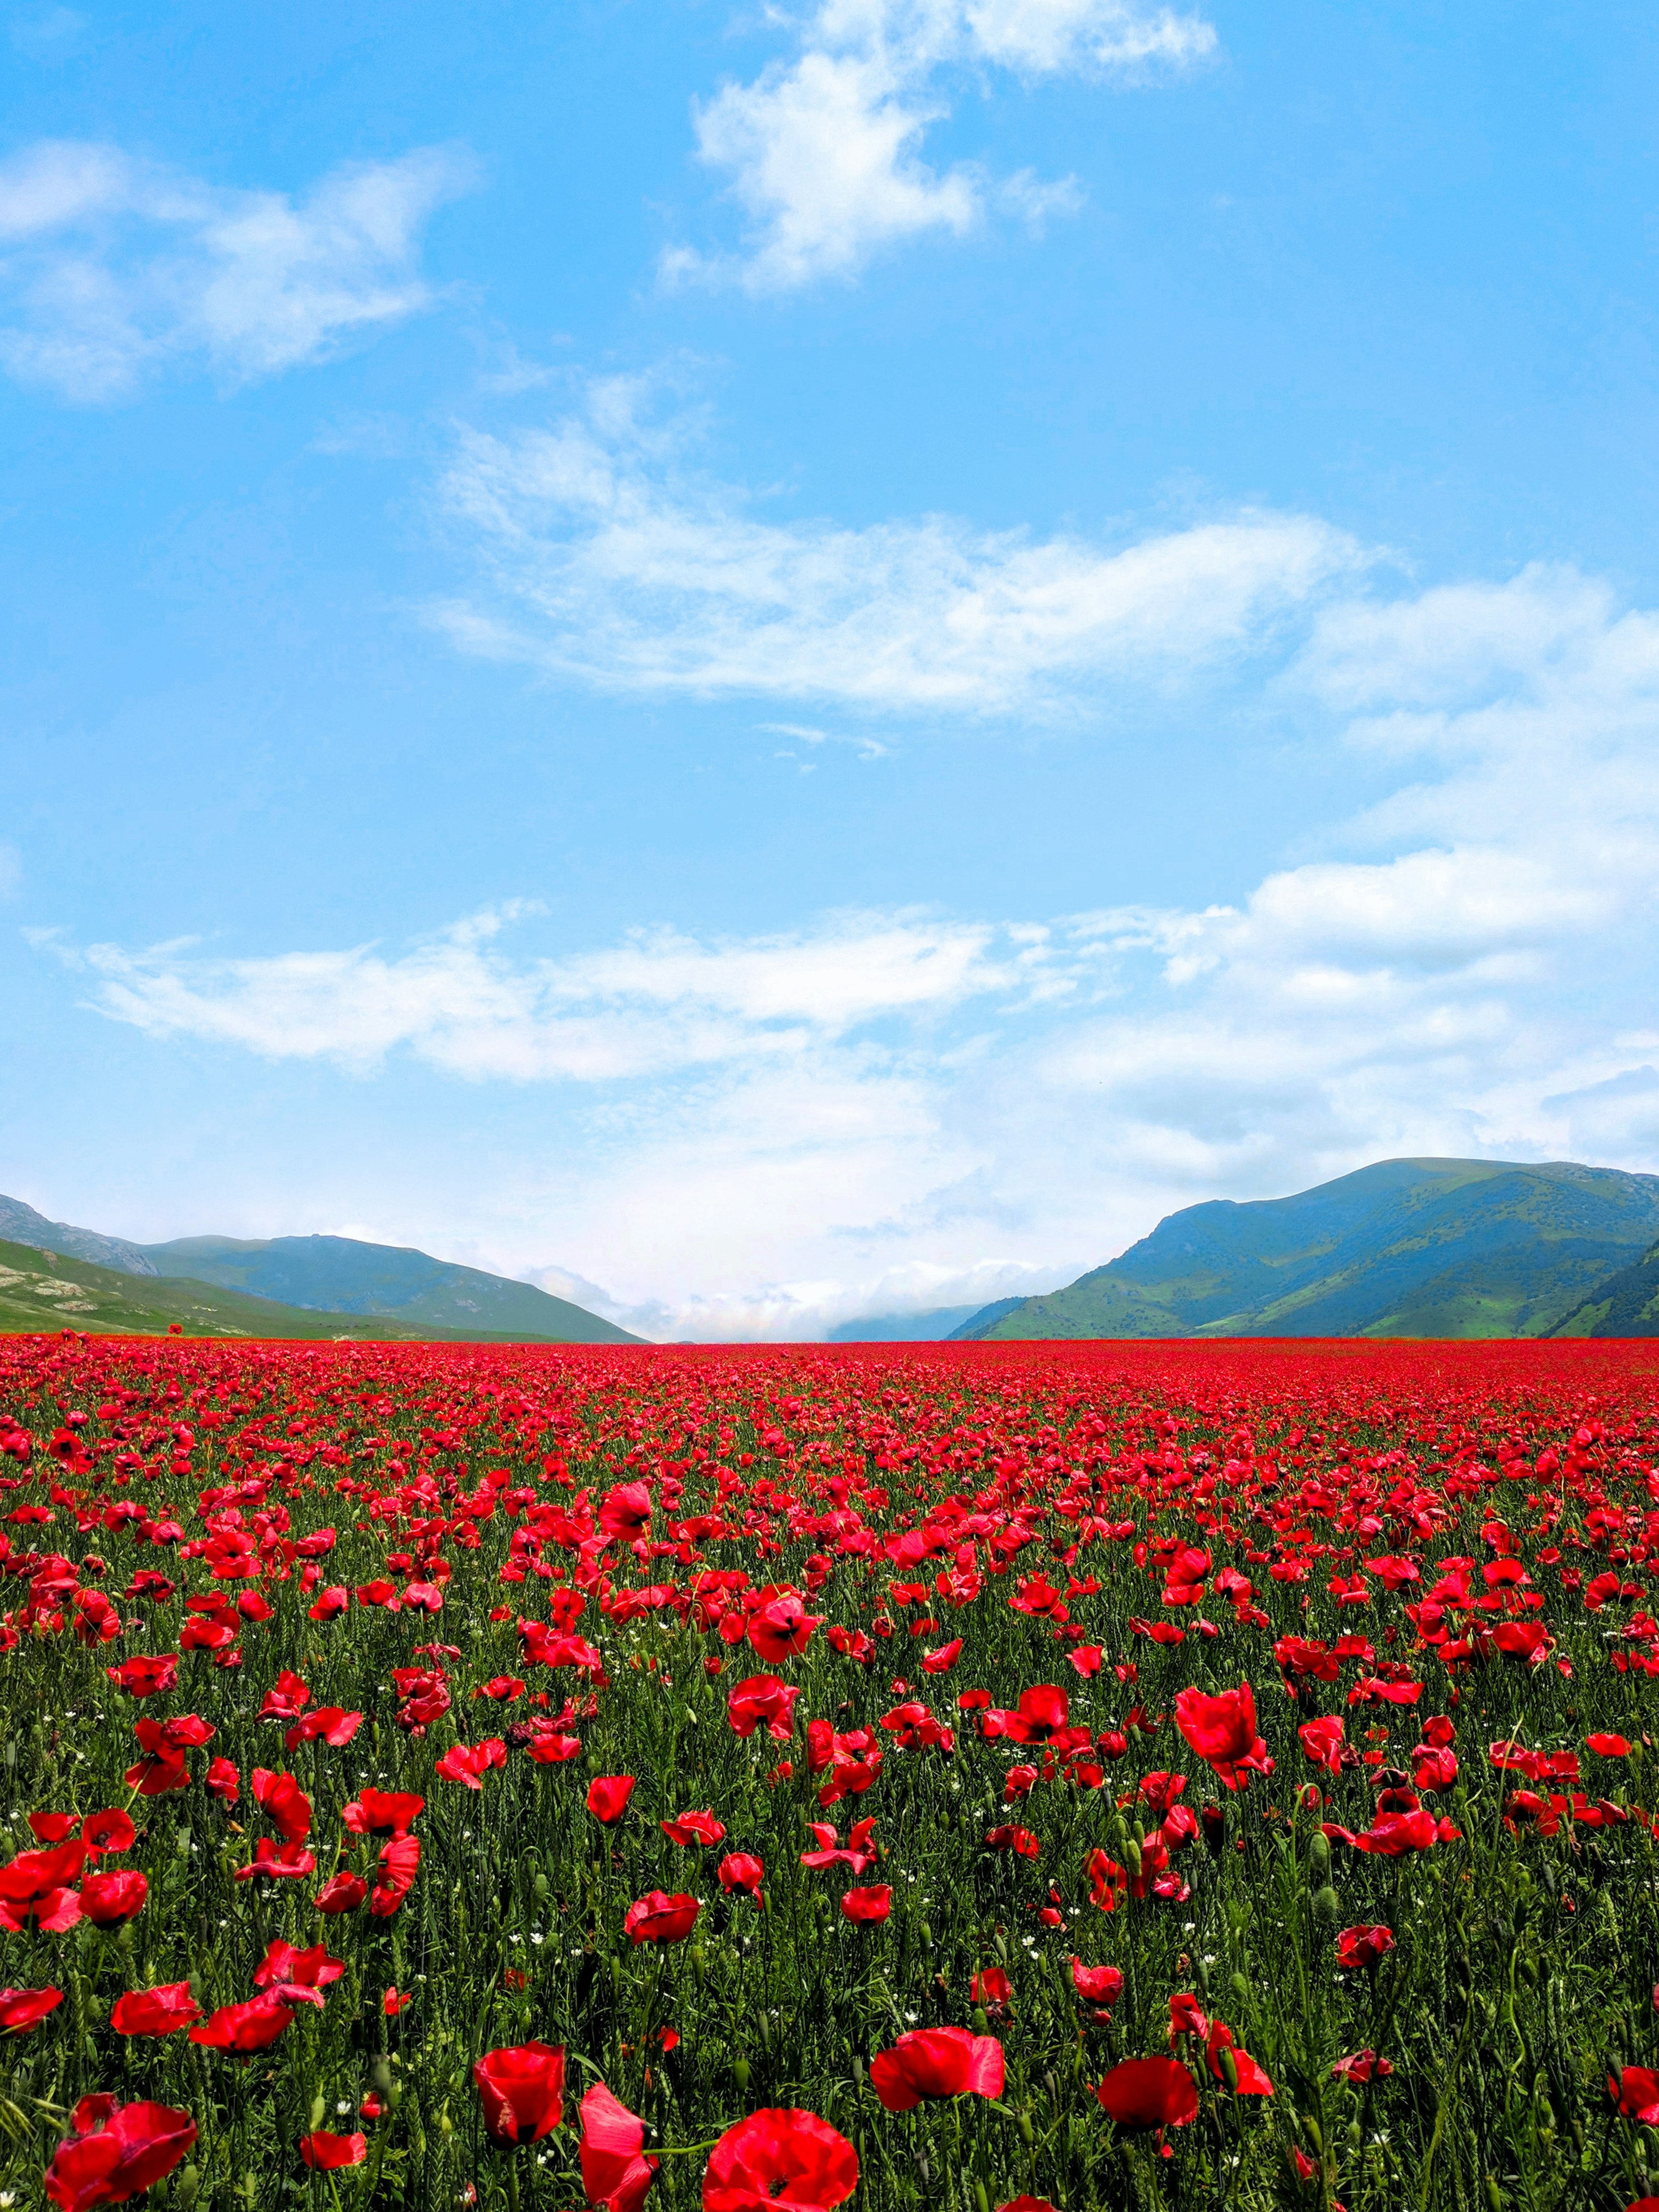 It was phenomenal, in the spring not far from Alaverdi, right in the wheat field a sea of wild tulips was formed. For this photo, I and my close friend rushed off in search of a field of flowers on the road practically on the border with Georgia. That was awesome day.